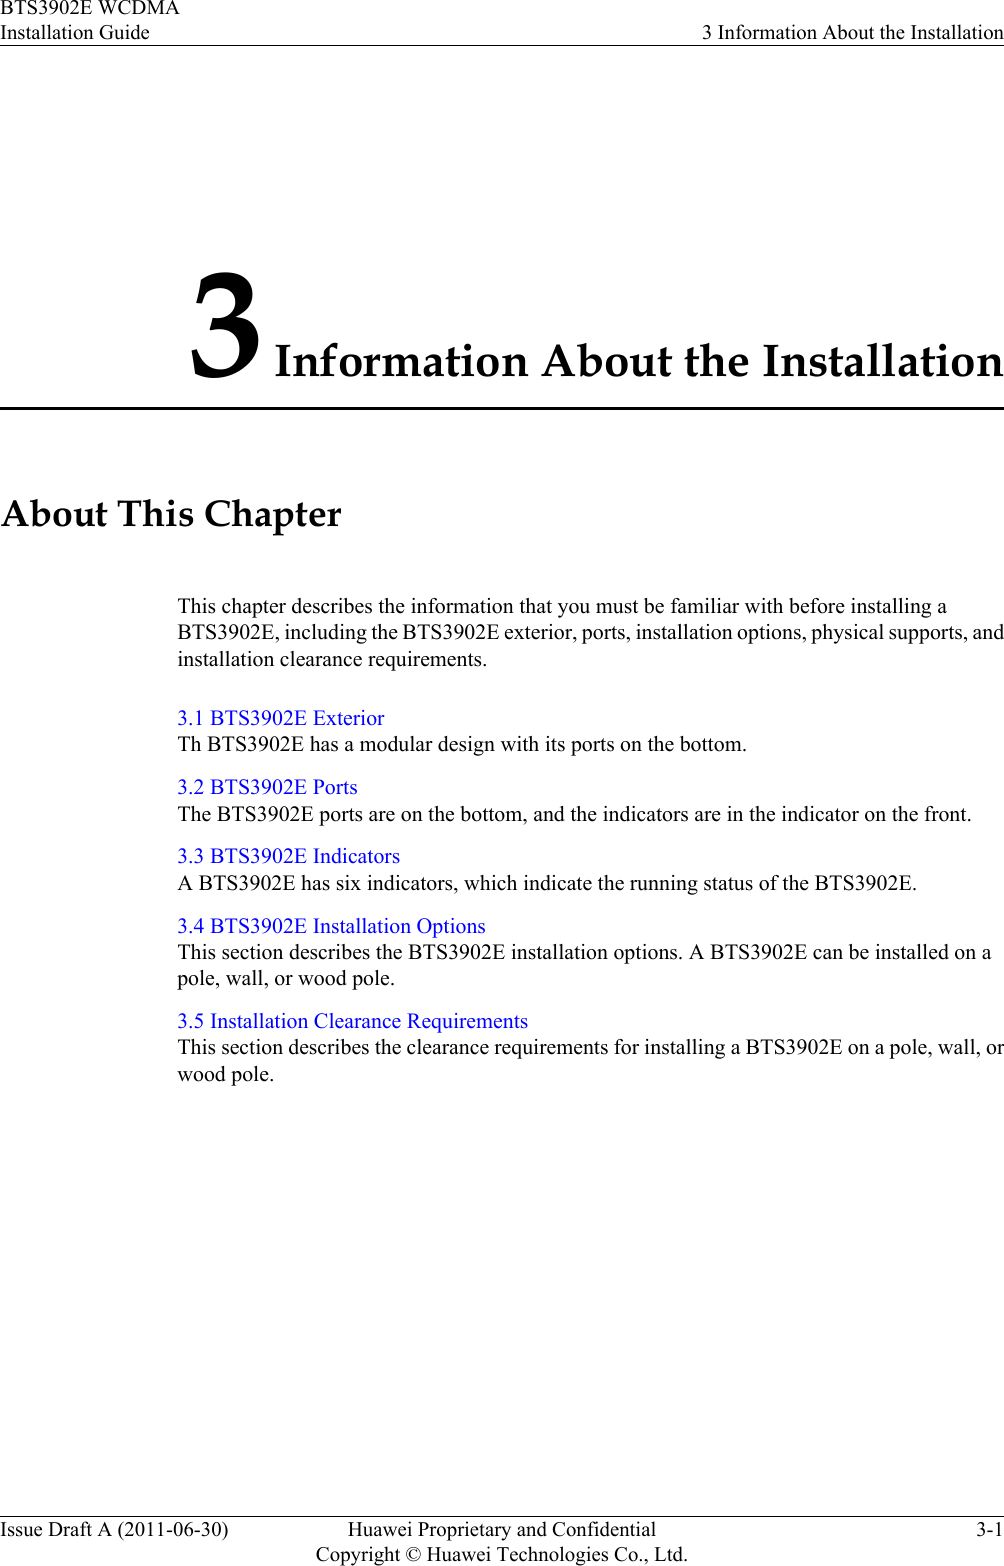 3 Information About the InstallationAbout This ChapterThis chapter describes the information that you must be familiar with before installing aBTS3902E, including the BTS3902E exterior, ports, installation options, physical supports, andinstallation clearance requirements.3.1 BTS3902E ExteriorTh BTS3902E has a modular design with its ports on the bottom.3.2 BTS3902E PortsThe BTS3902E ports are on the bottom, and the indicators are in the indicator on the front.3.3 BTS3902E IndicatorsA BTS3902E has six indicators, which indicate the running status of the BTS3902E.3.4 BTS3902E Installation OptionsThis section describes the BTS3902E installation options. A BTS3902E can be installed on apole, wall, or wood pole.3.5 Installation Clearance RequirementsThis section describes the clearance requirements for installing a BTS3902E on a pole, wall, orwood pole.BTS3902E WCDMAInstallation Guide 3 Information About the InstallationIssue Draft A (2011-06-30) Huawei Proprietary and ConfidentialCopyright © Huawei Technologies Co., Ltd.3-1